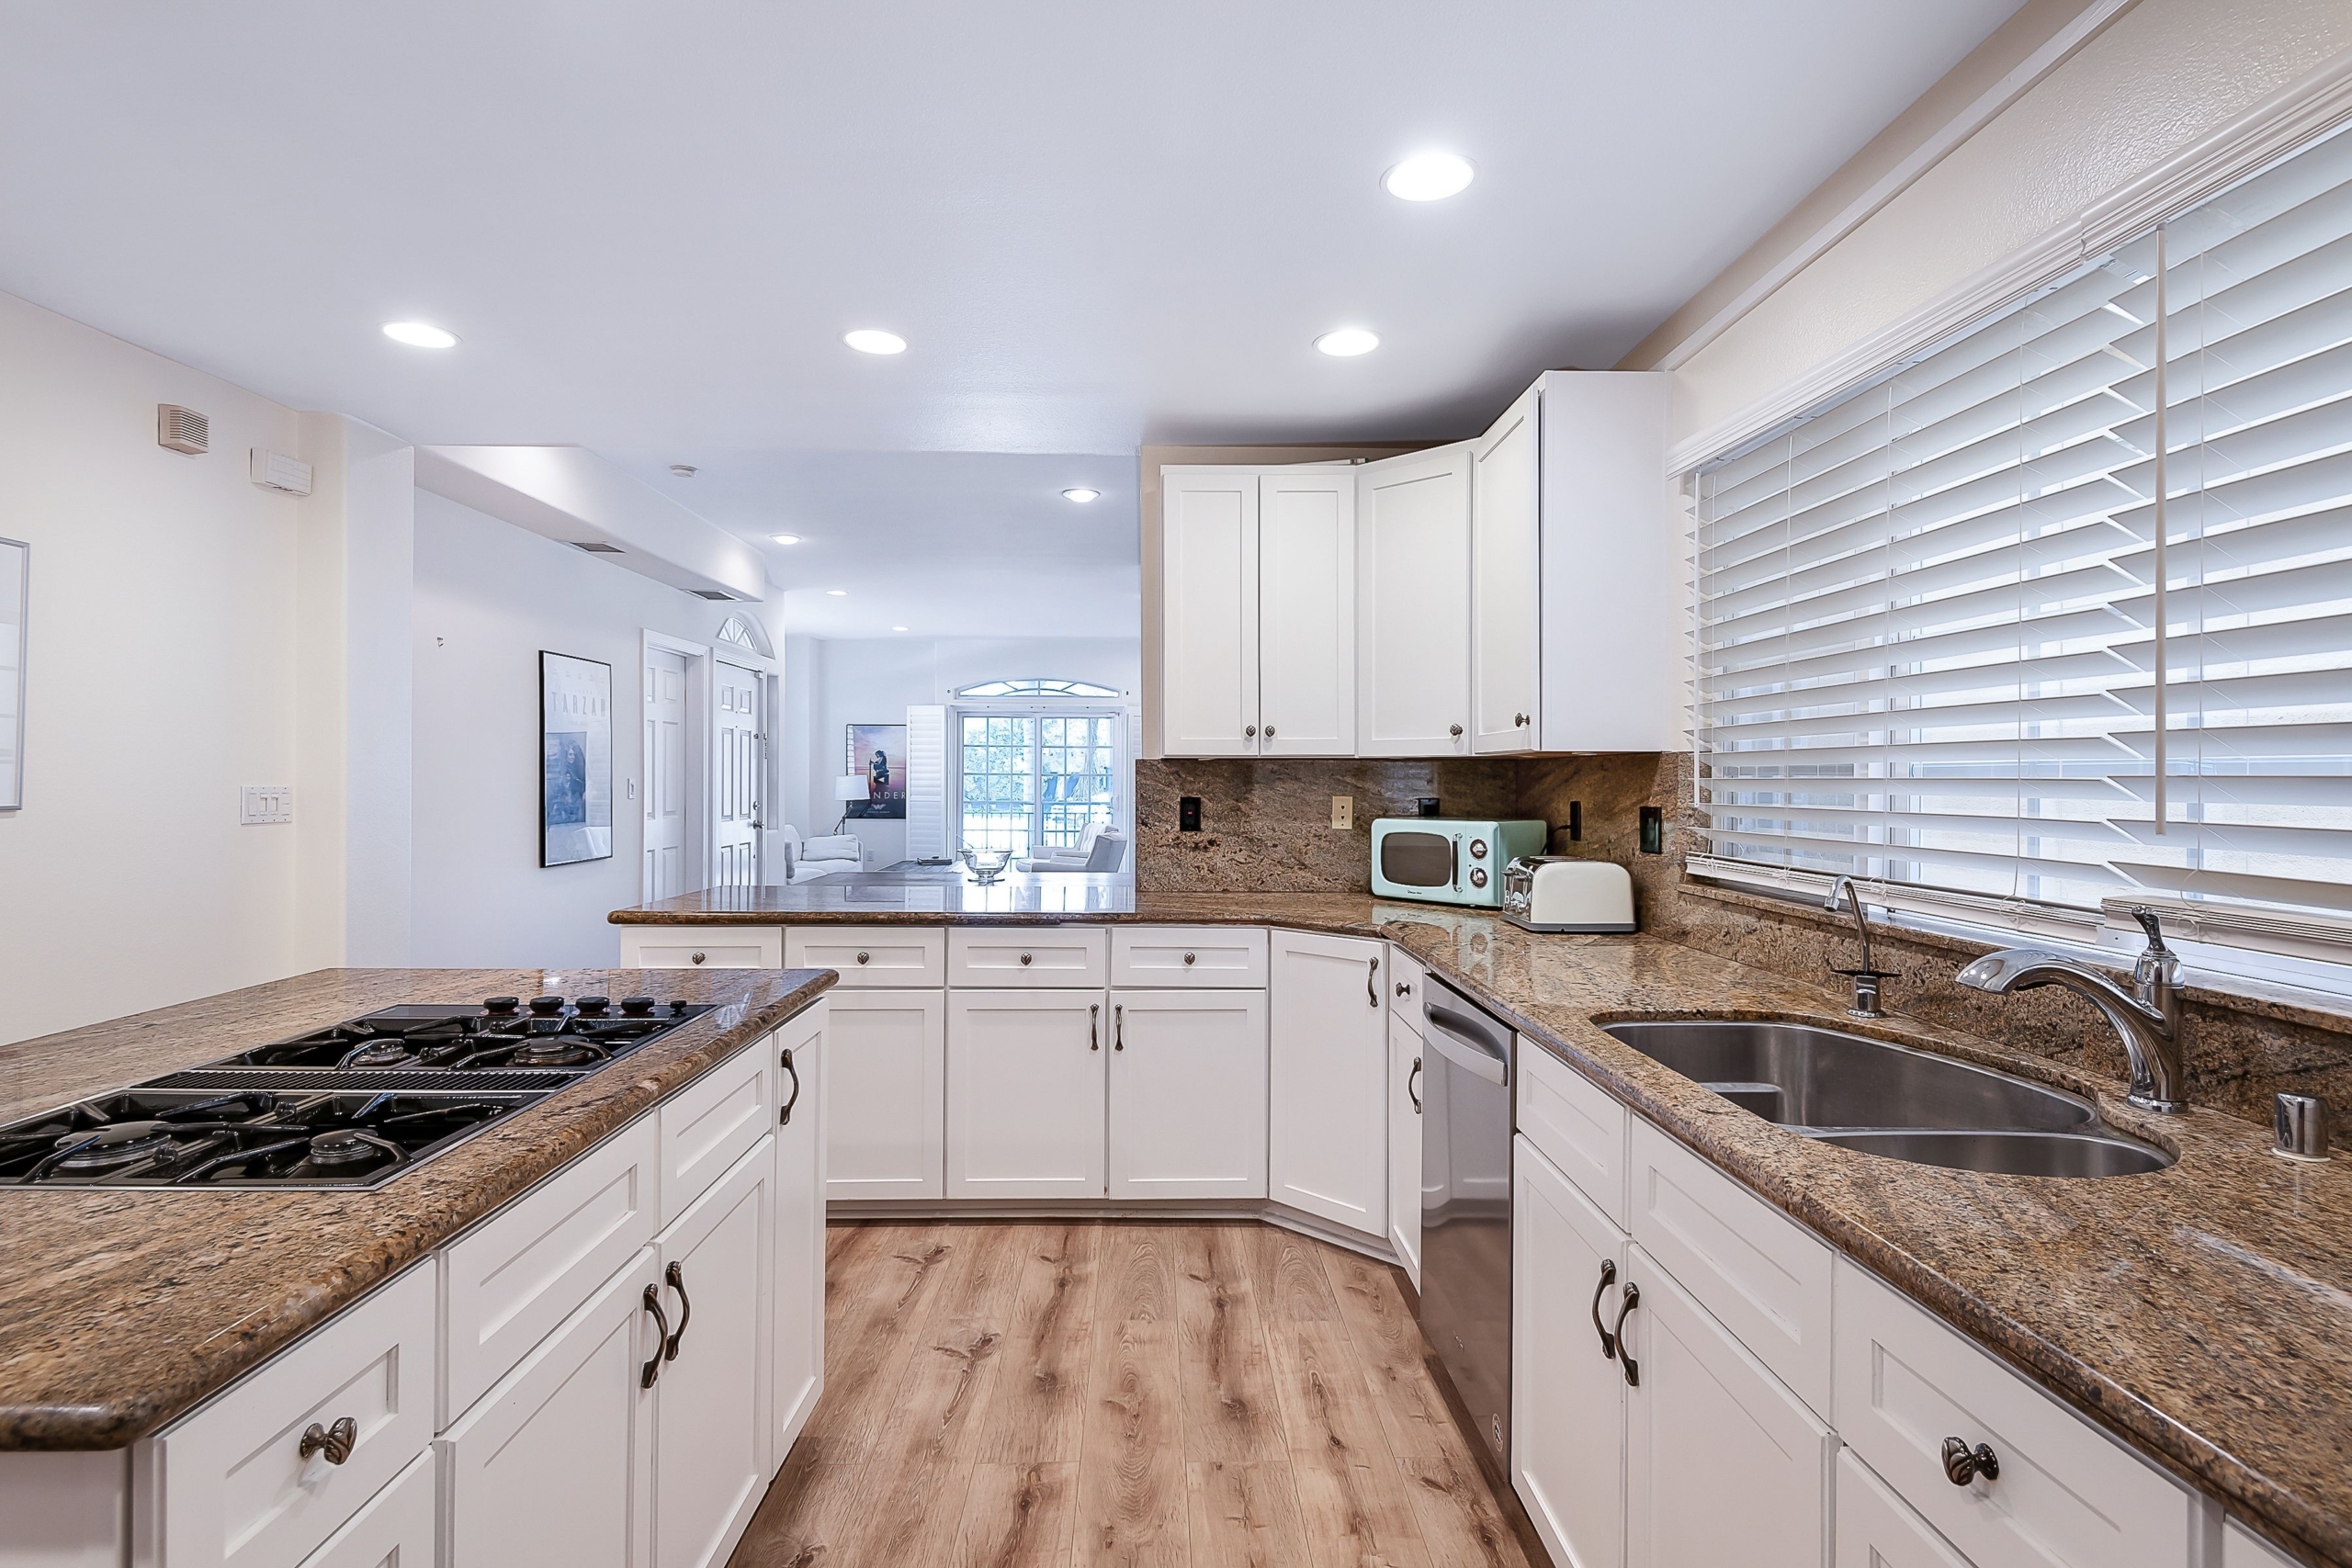 Bright white kitchen with brown granite and stainless appliances